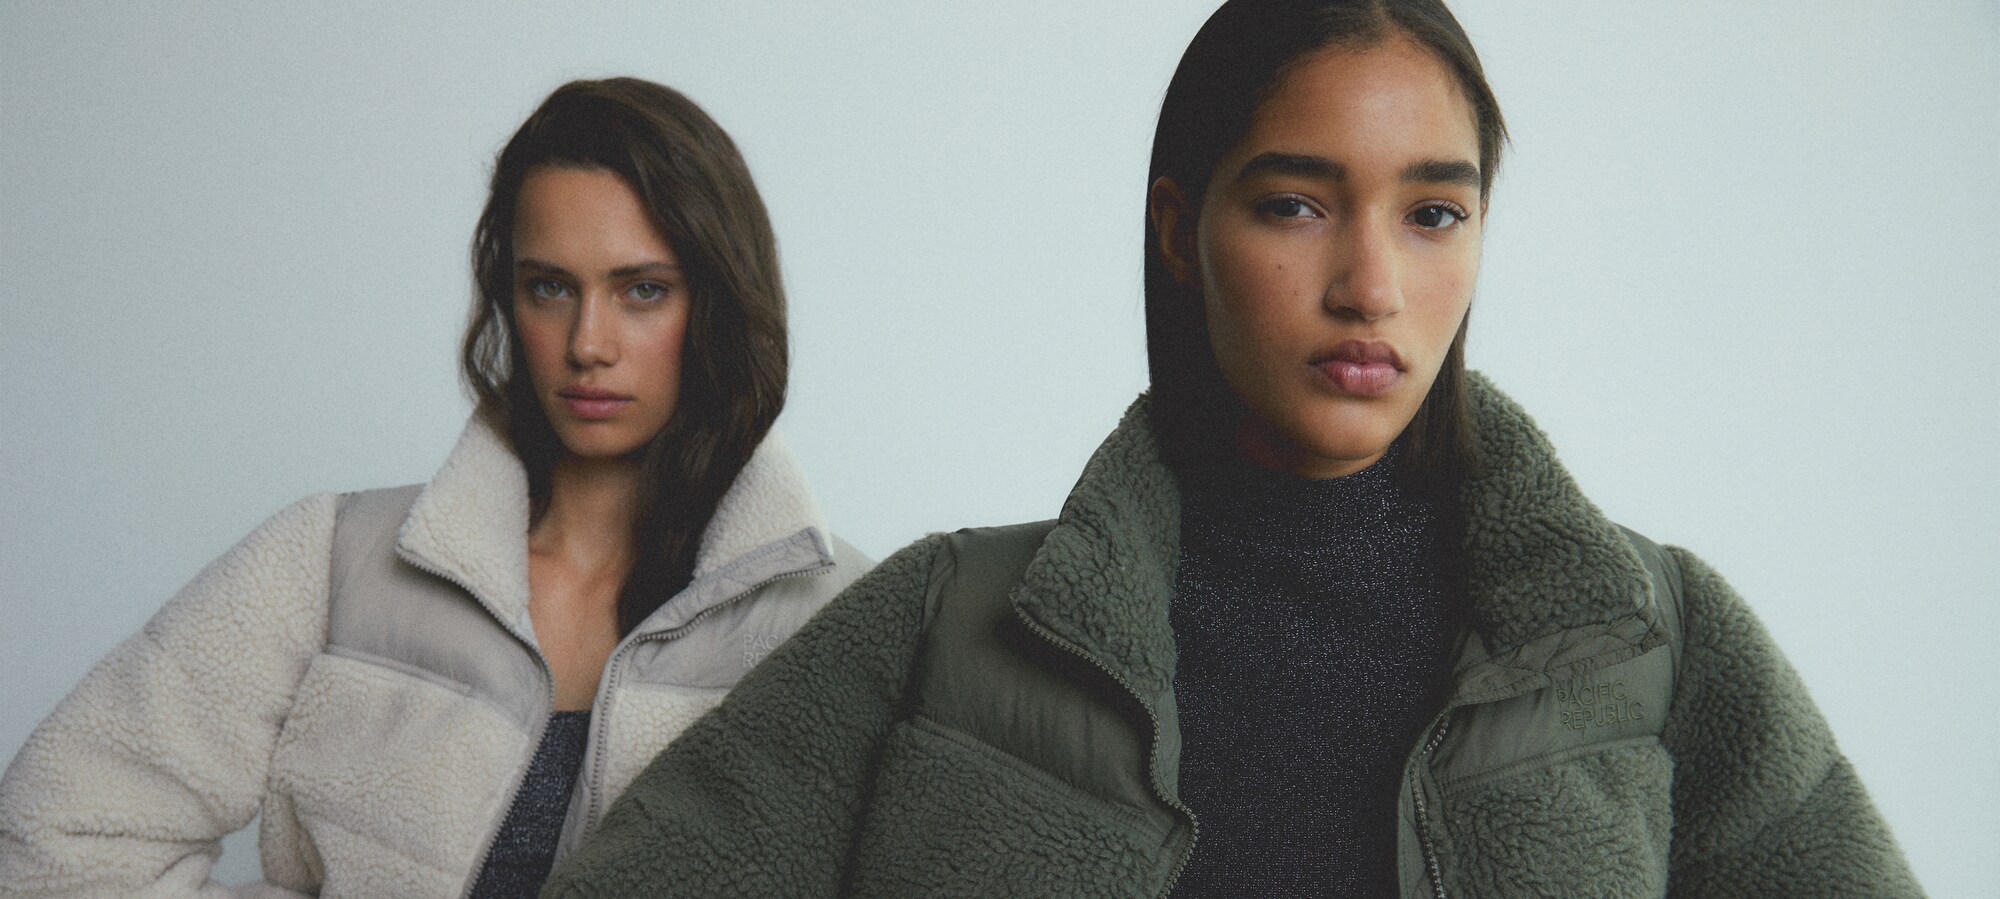 Jump into this NEW COLLECTION! Cold, but Stylish! Pull & Bear